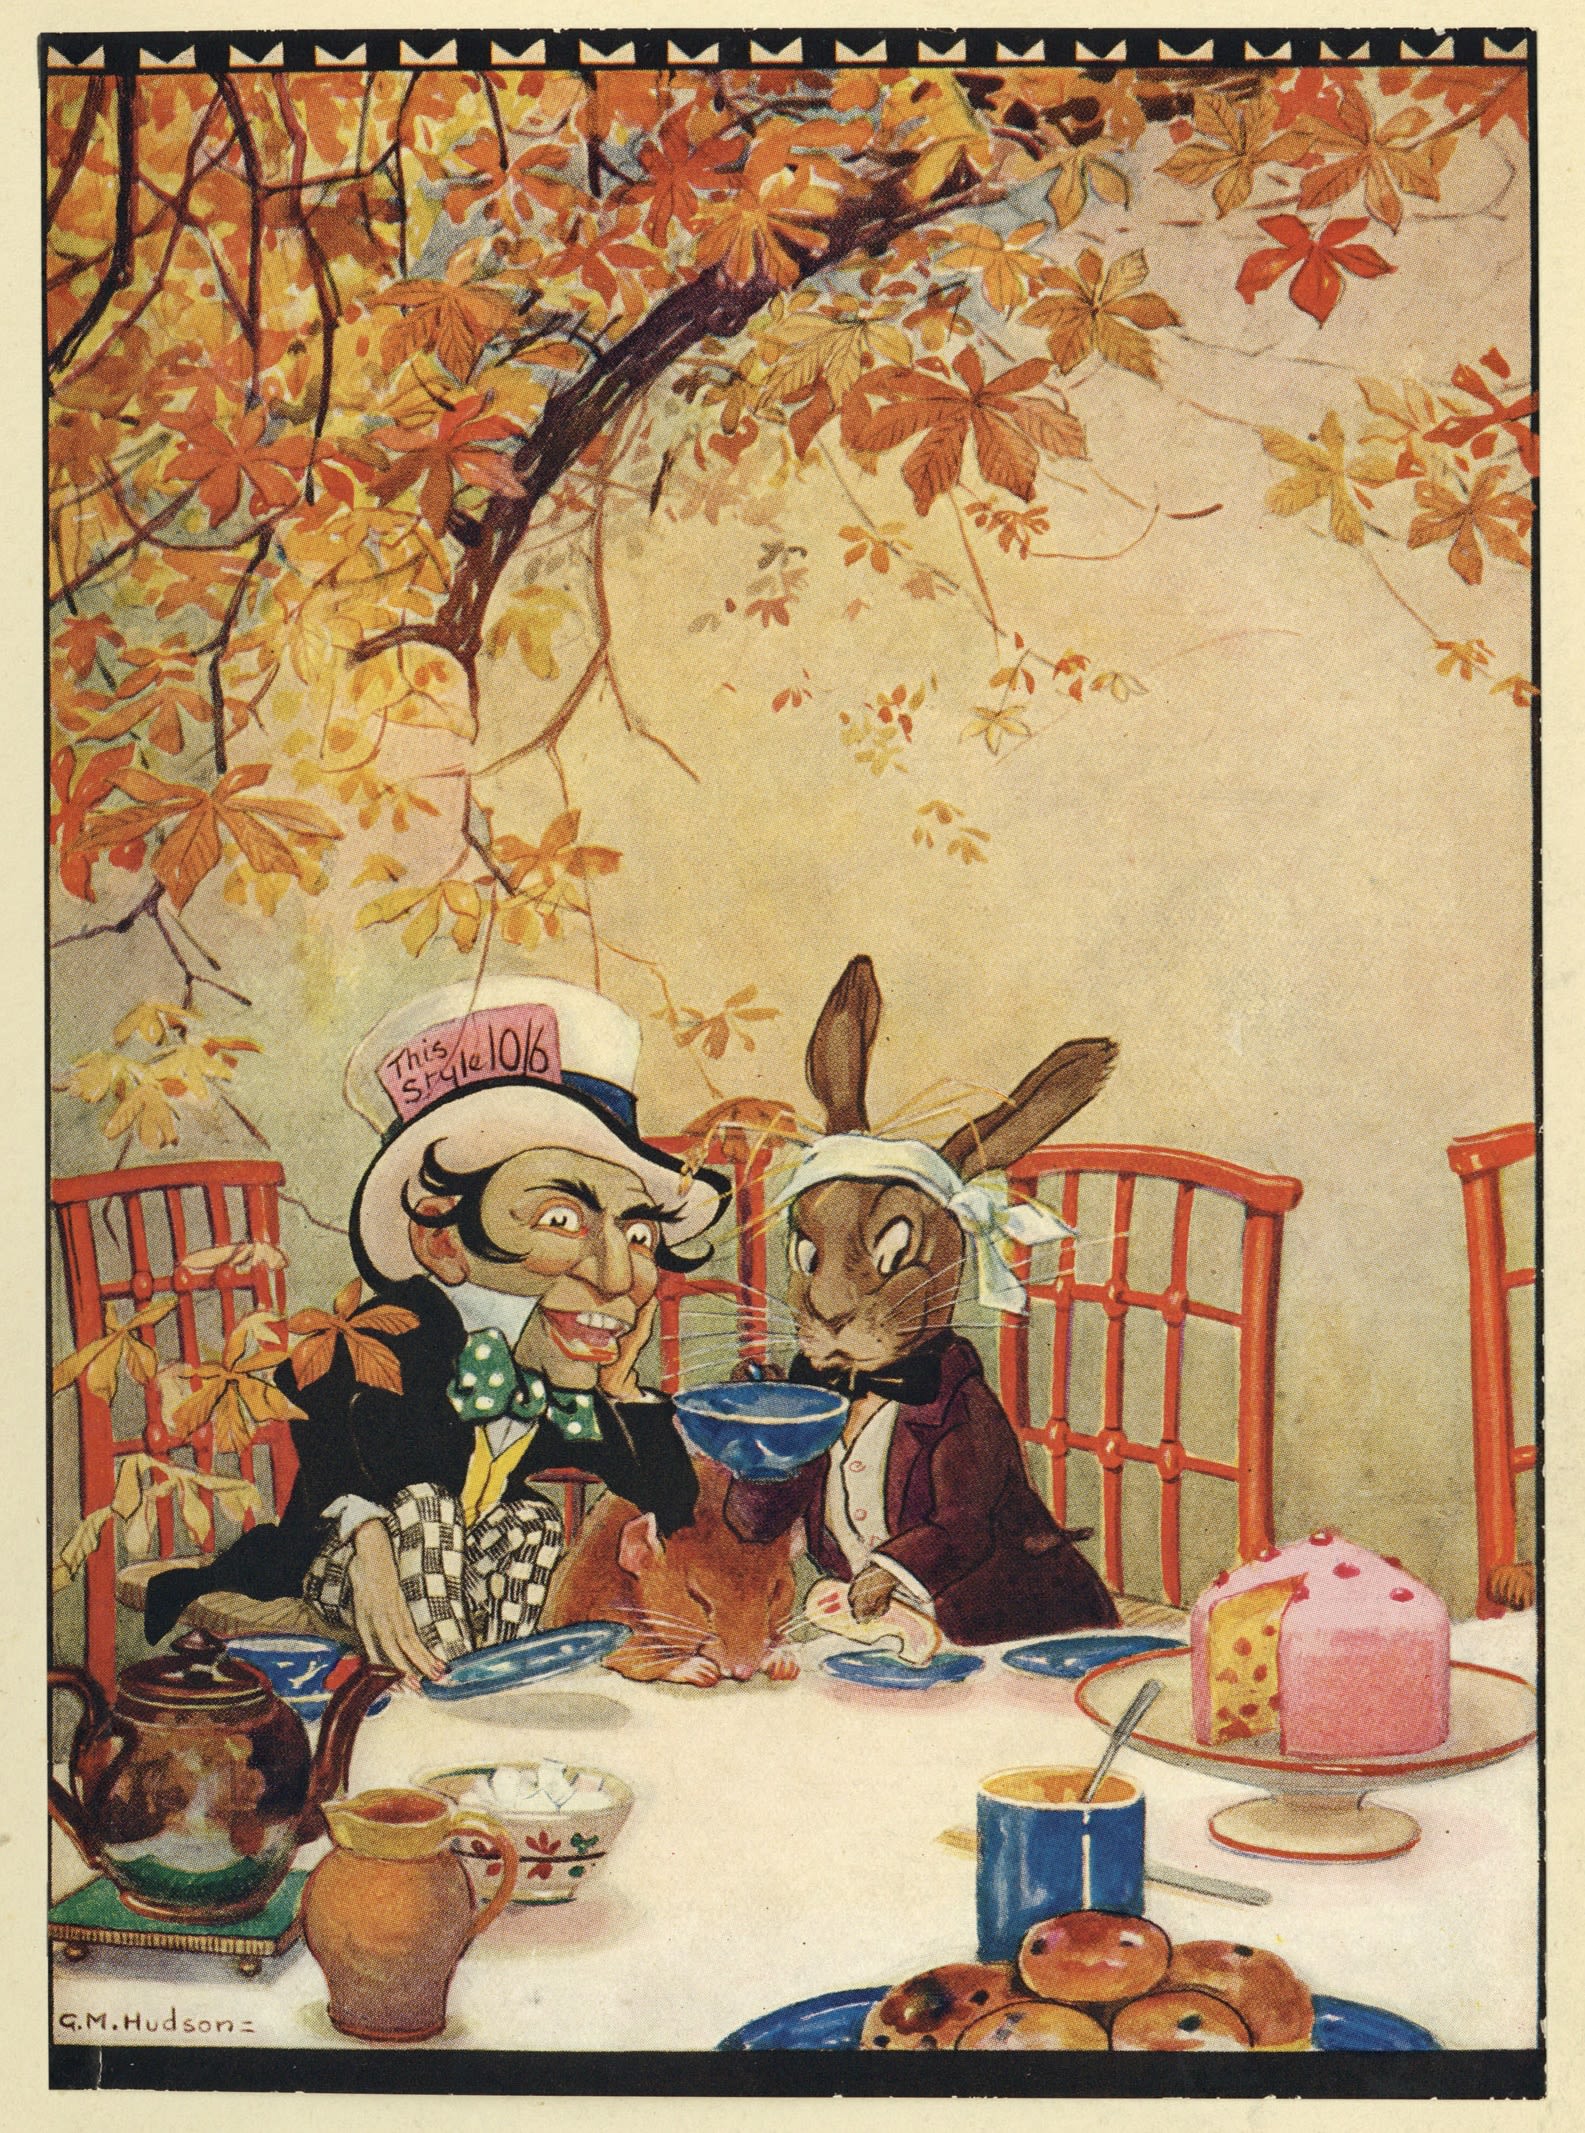 http://speccollstories.ncl.ac.uk/getcreative-lets-party-alice-in-wonderland/assets/Lh9GSMnBPa/mad-hatter-plate-1585x2133.jpeg